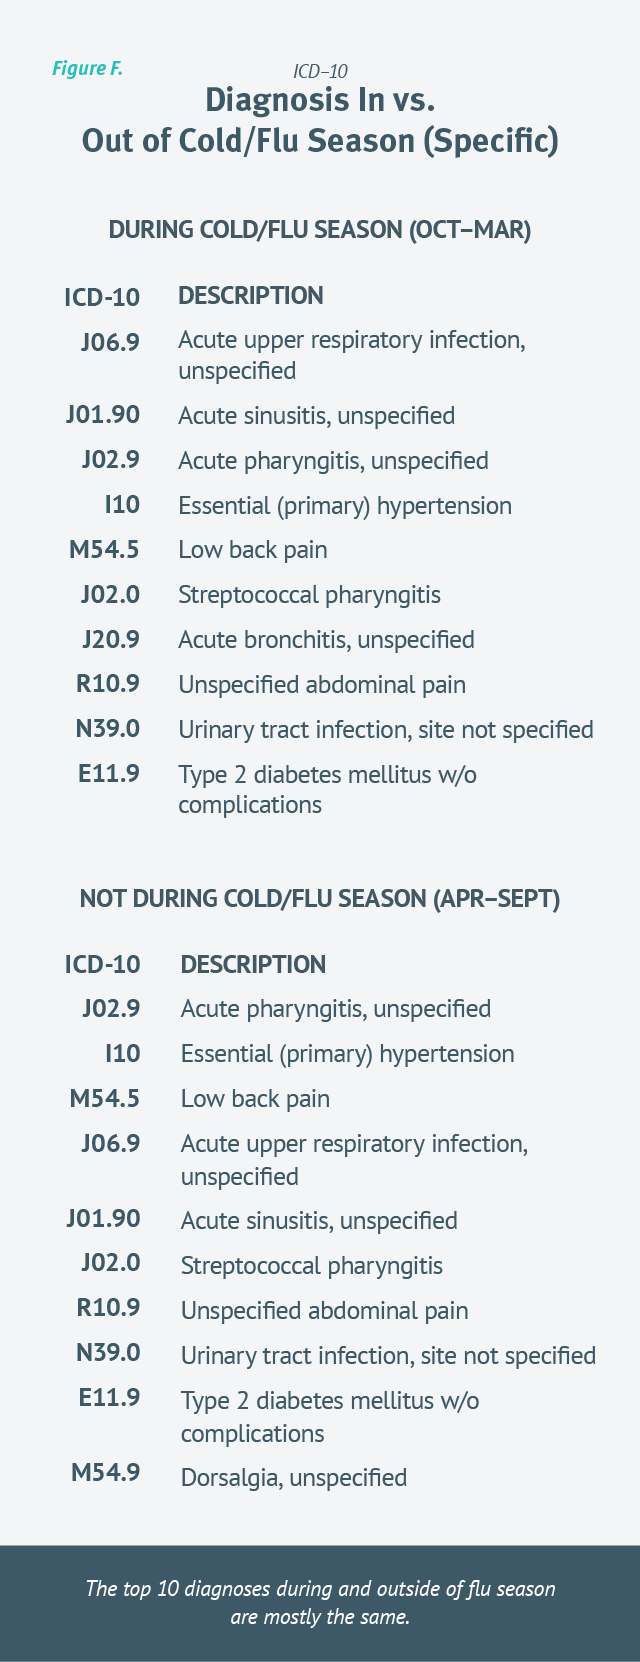 ICD-10 Diagnosis In vs Out of Cold/Flu Season - Chart